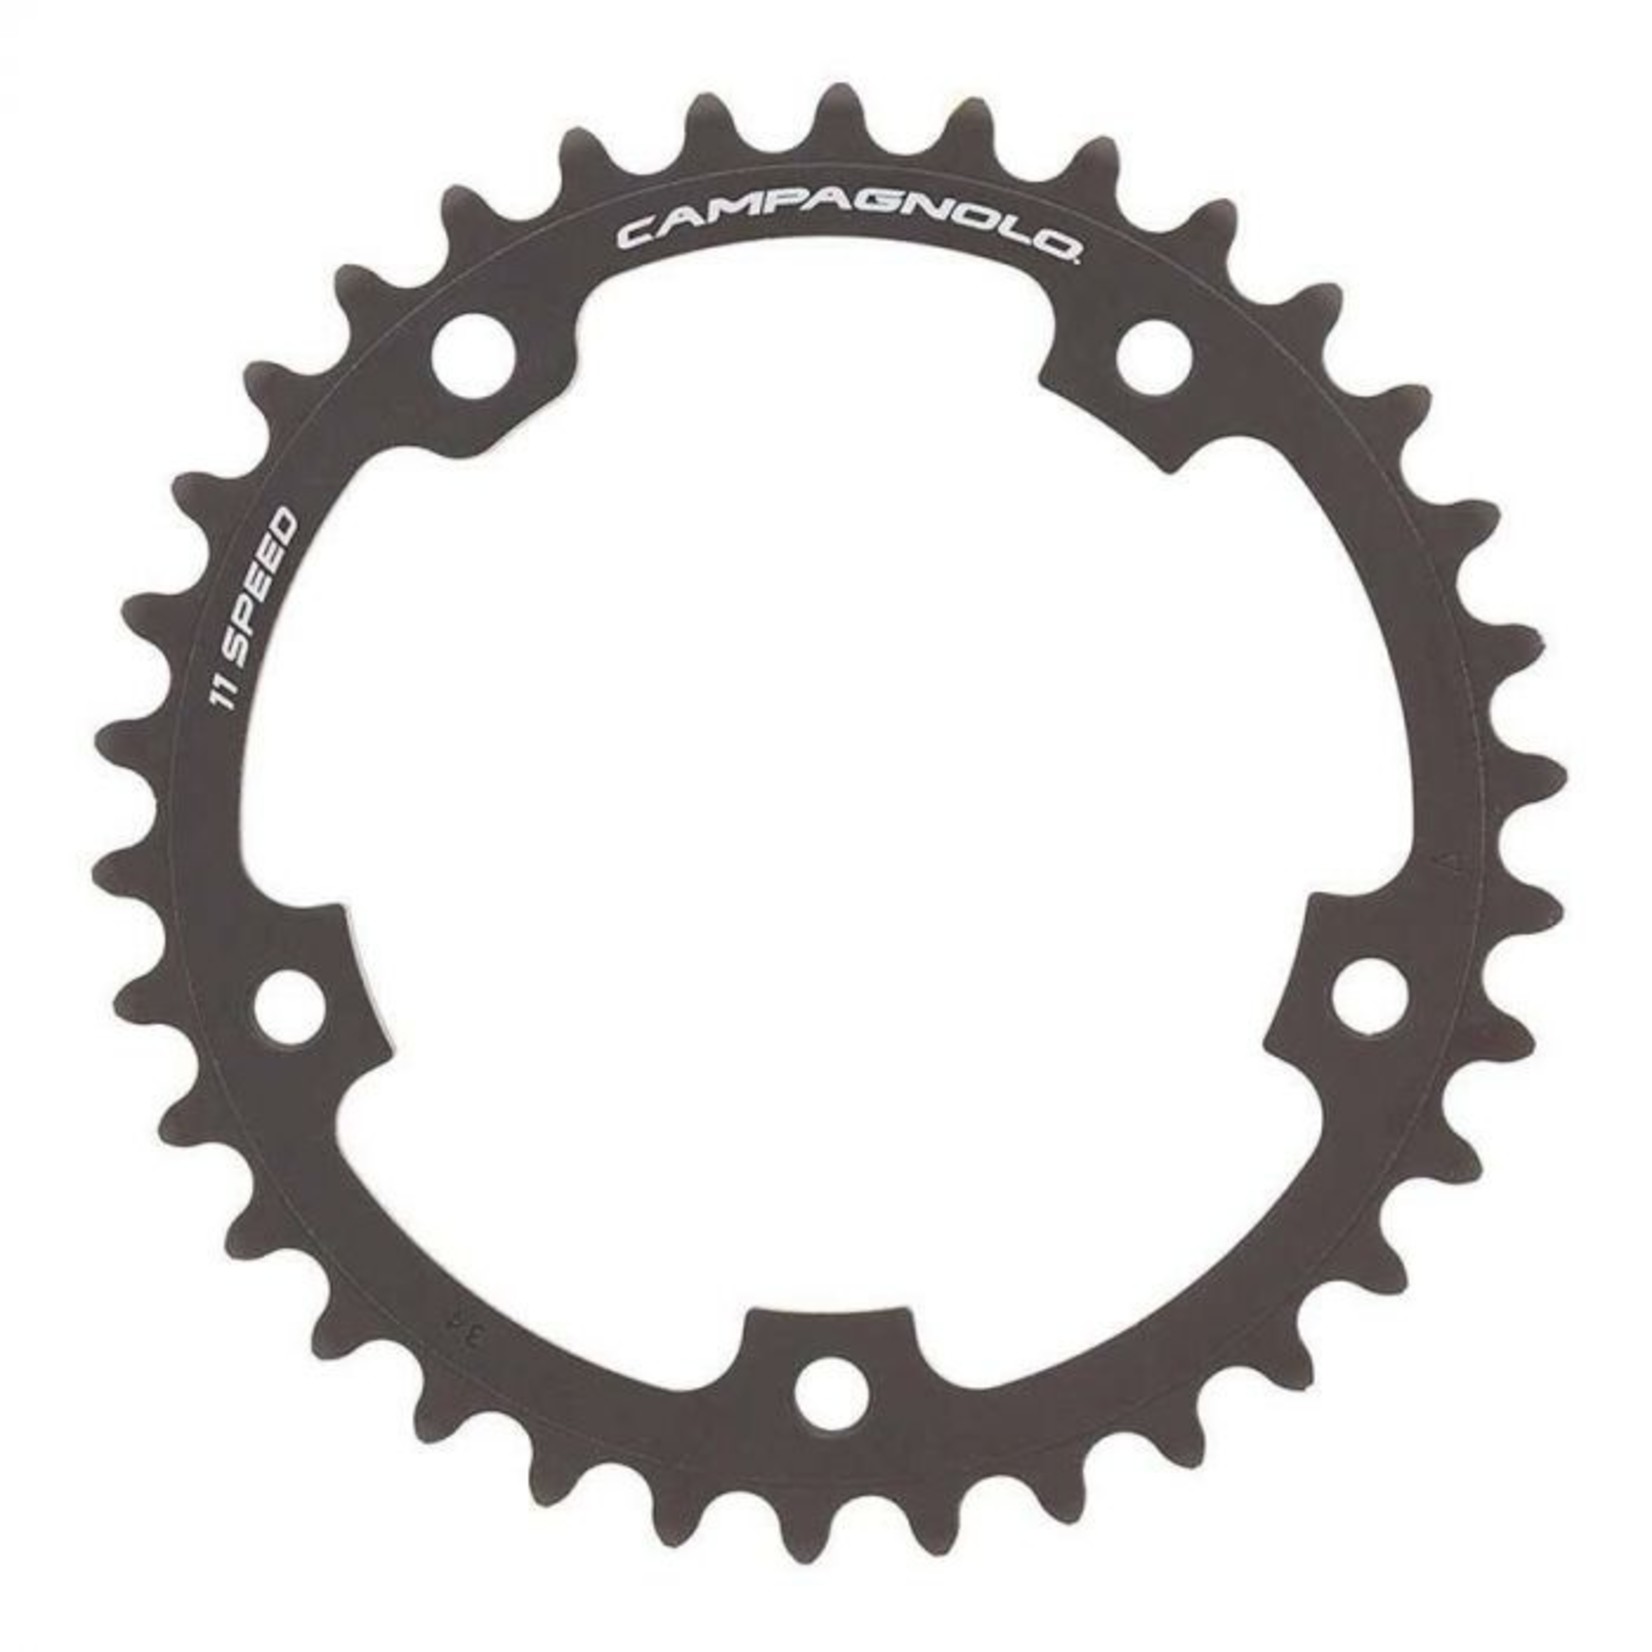 CAMPAGNOLO SUPER RECORD 11 SPEED INNER CHAINRING, 34T, 2009-2010 (Non-threaded)